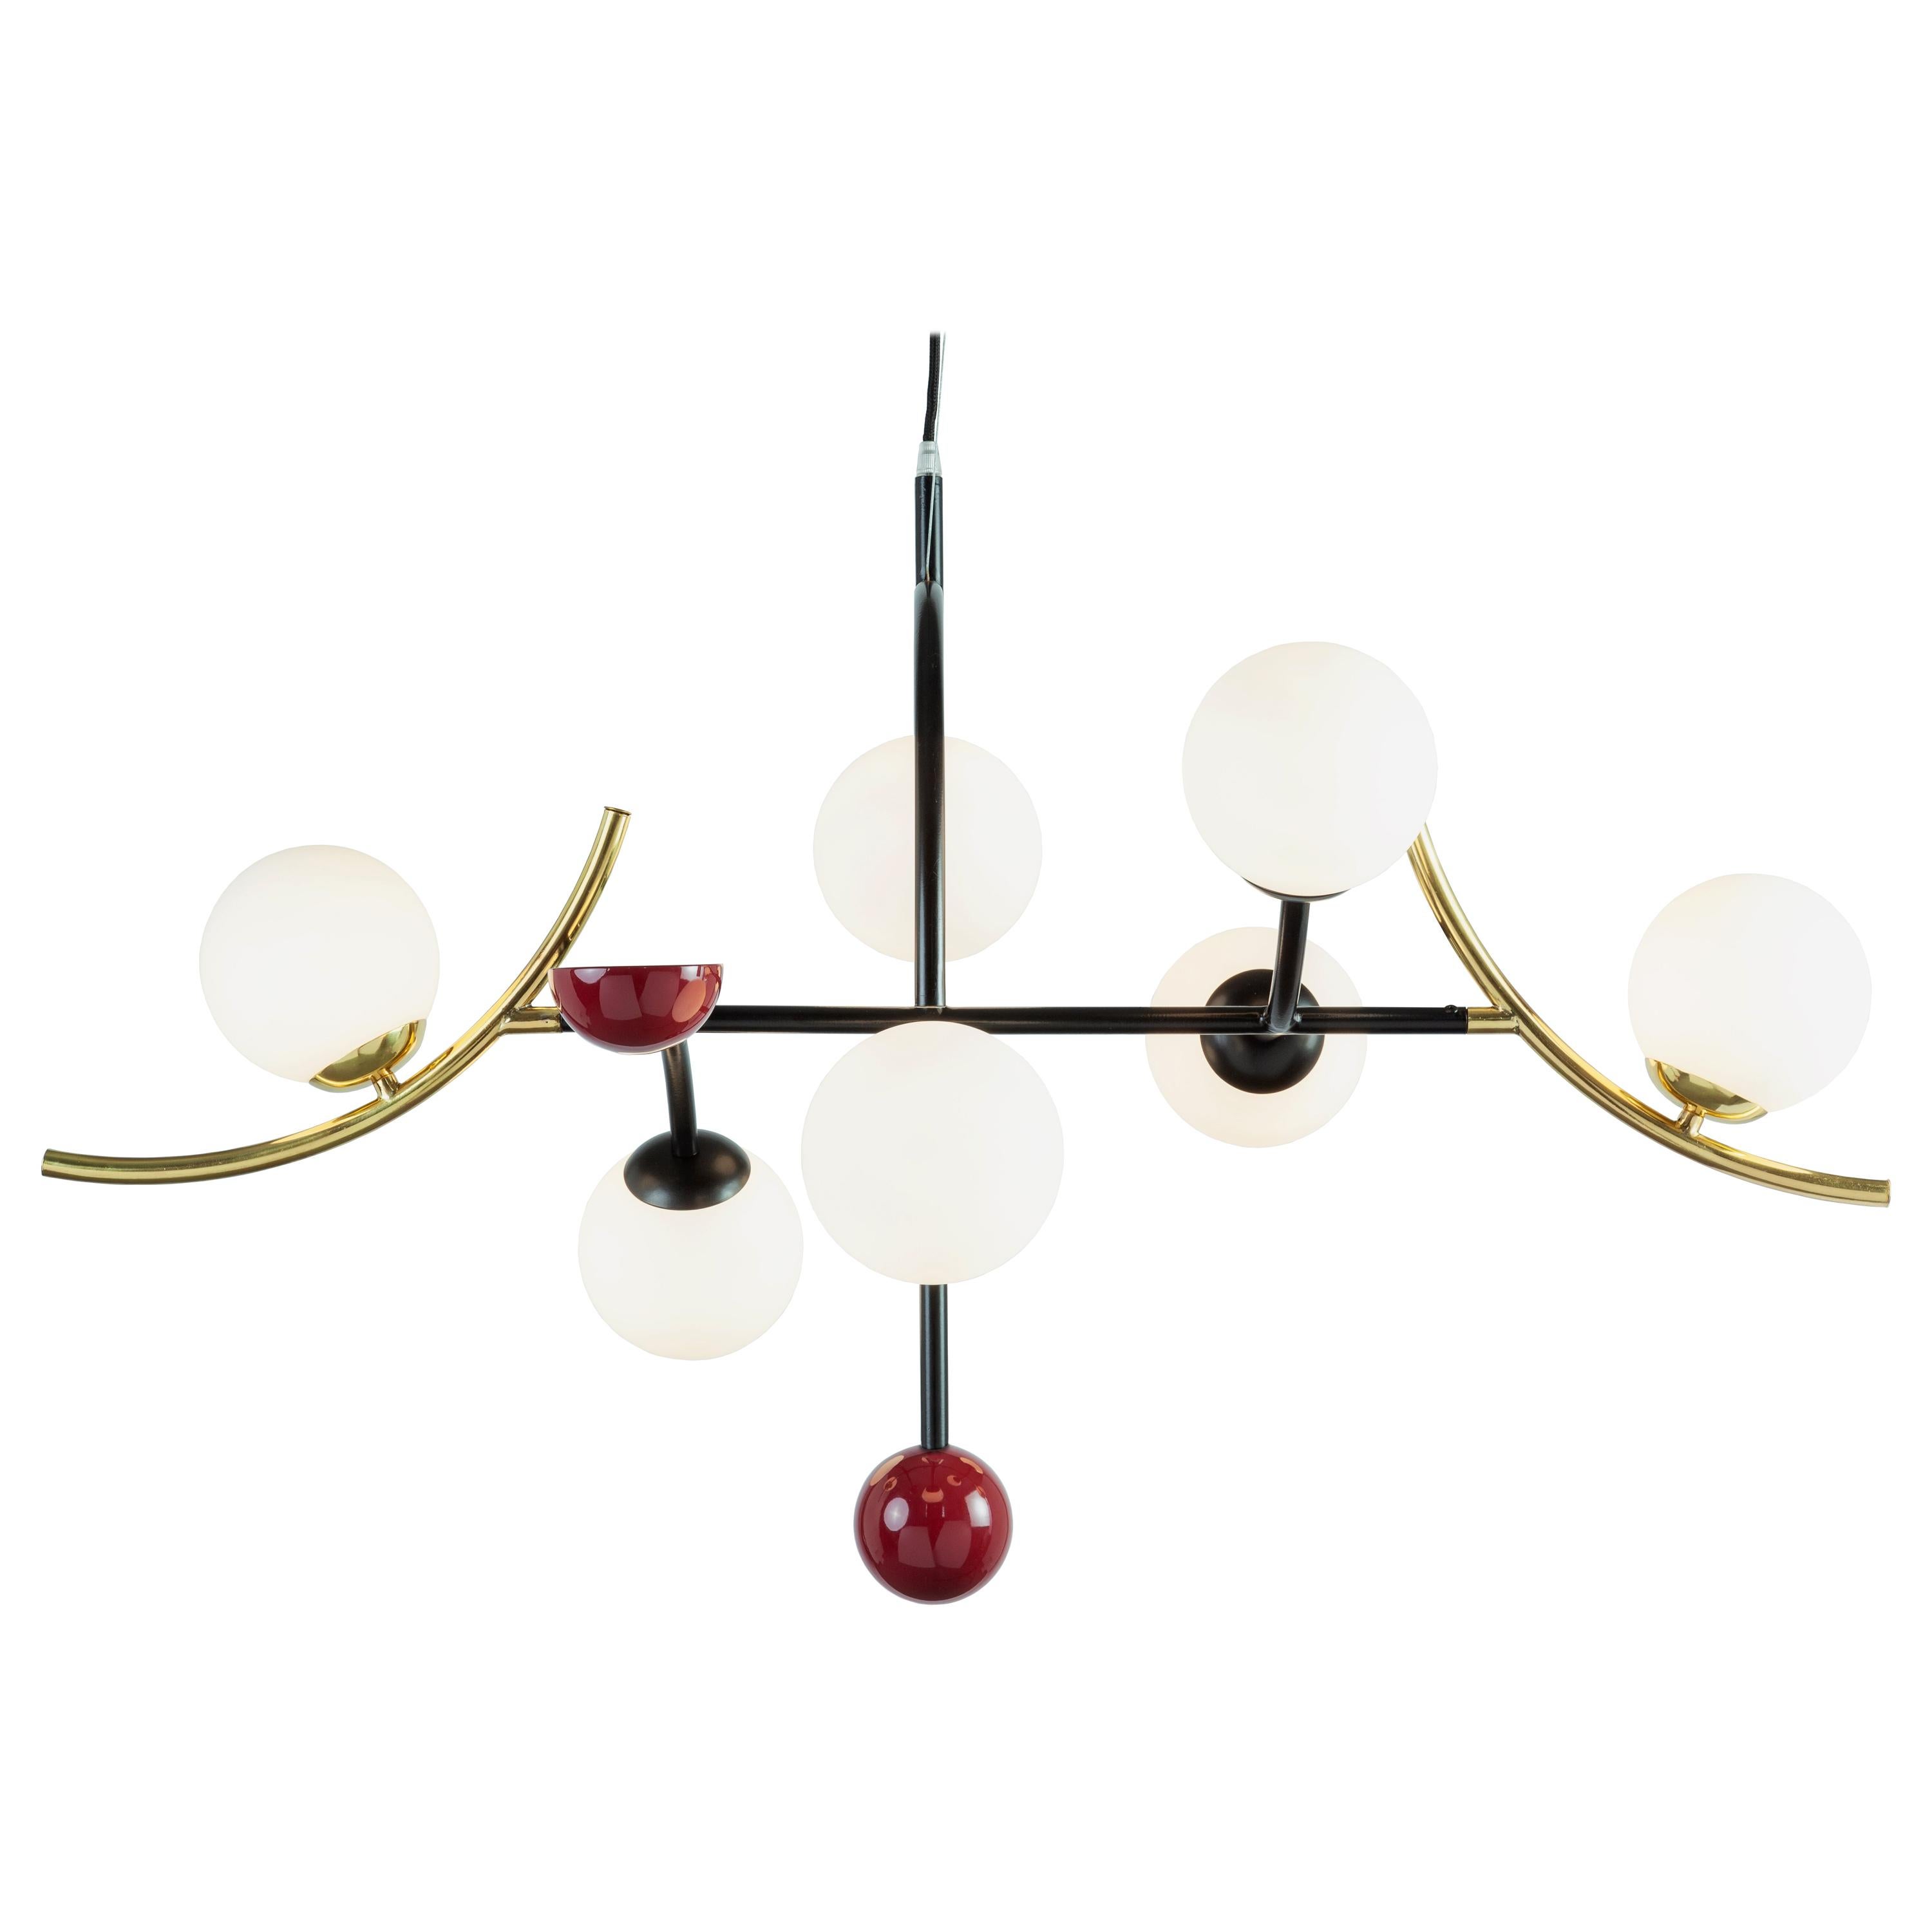 Art-Deco Inspired Brass, Lilac, Red Detail Helio Pendant Lamp by UTU For Sale 3